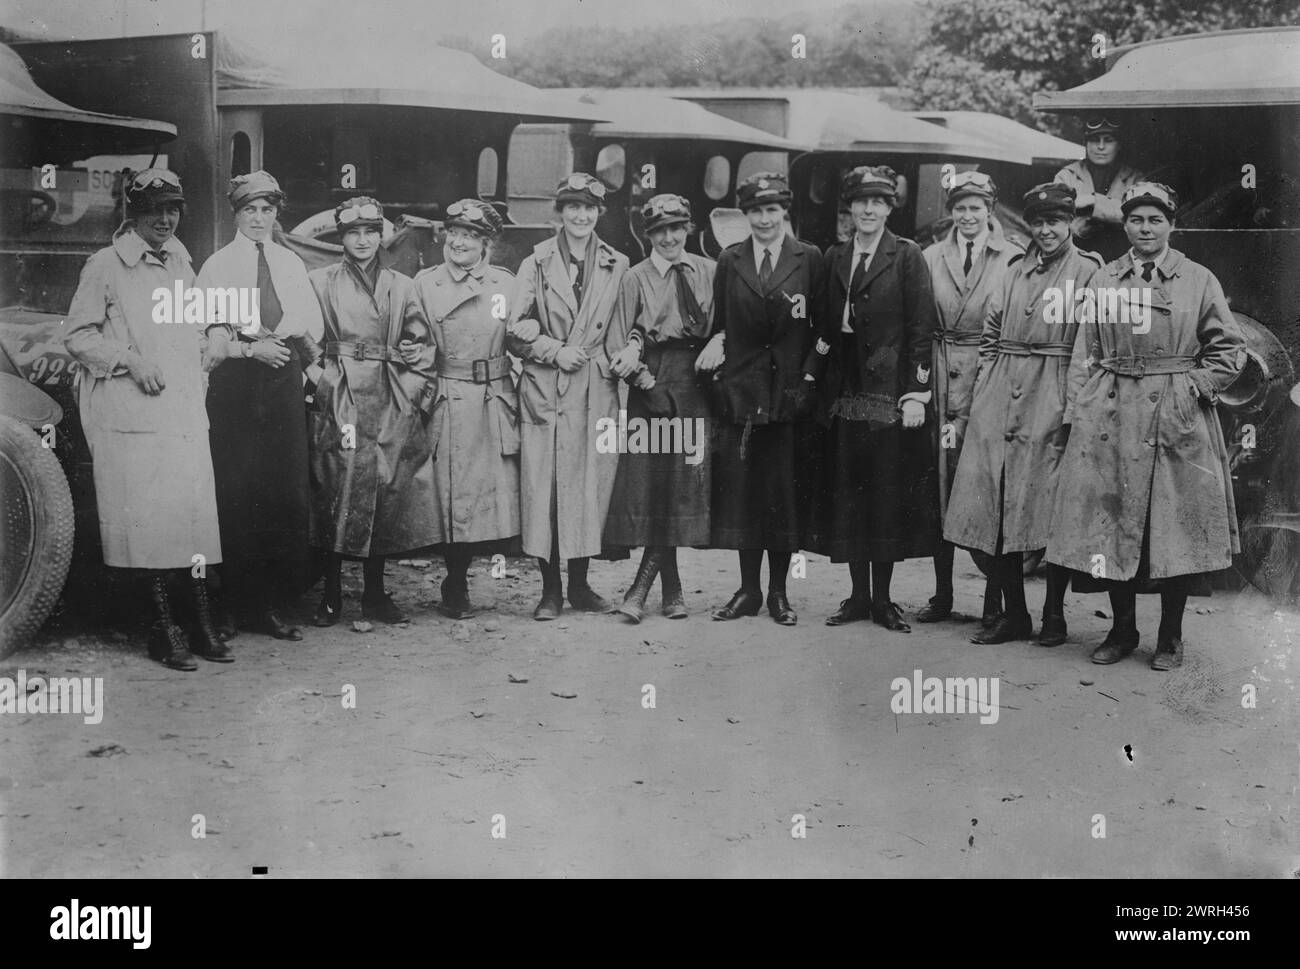 British Voluntary Aid ambulance drivers at front, 27 Jun 1917. Group of British Red Cross Society Voluntary Aid Detachment (VAD) and First Aid Nursing Yeomanry Women's Transport Service (F.A.N.Y.) female motor ambulance drivers at Etaples, France on June 27, 1917 during World War I. Stock Photo